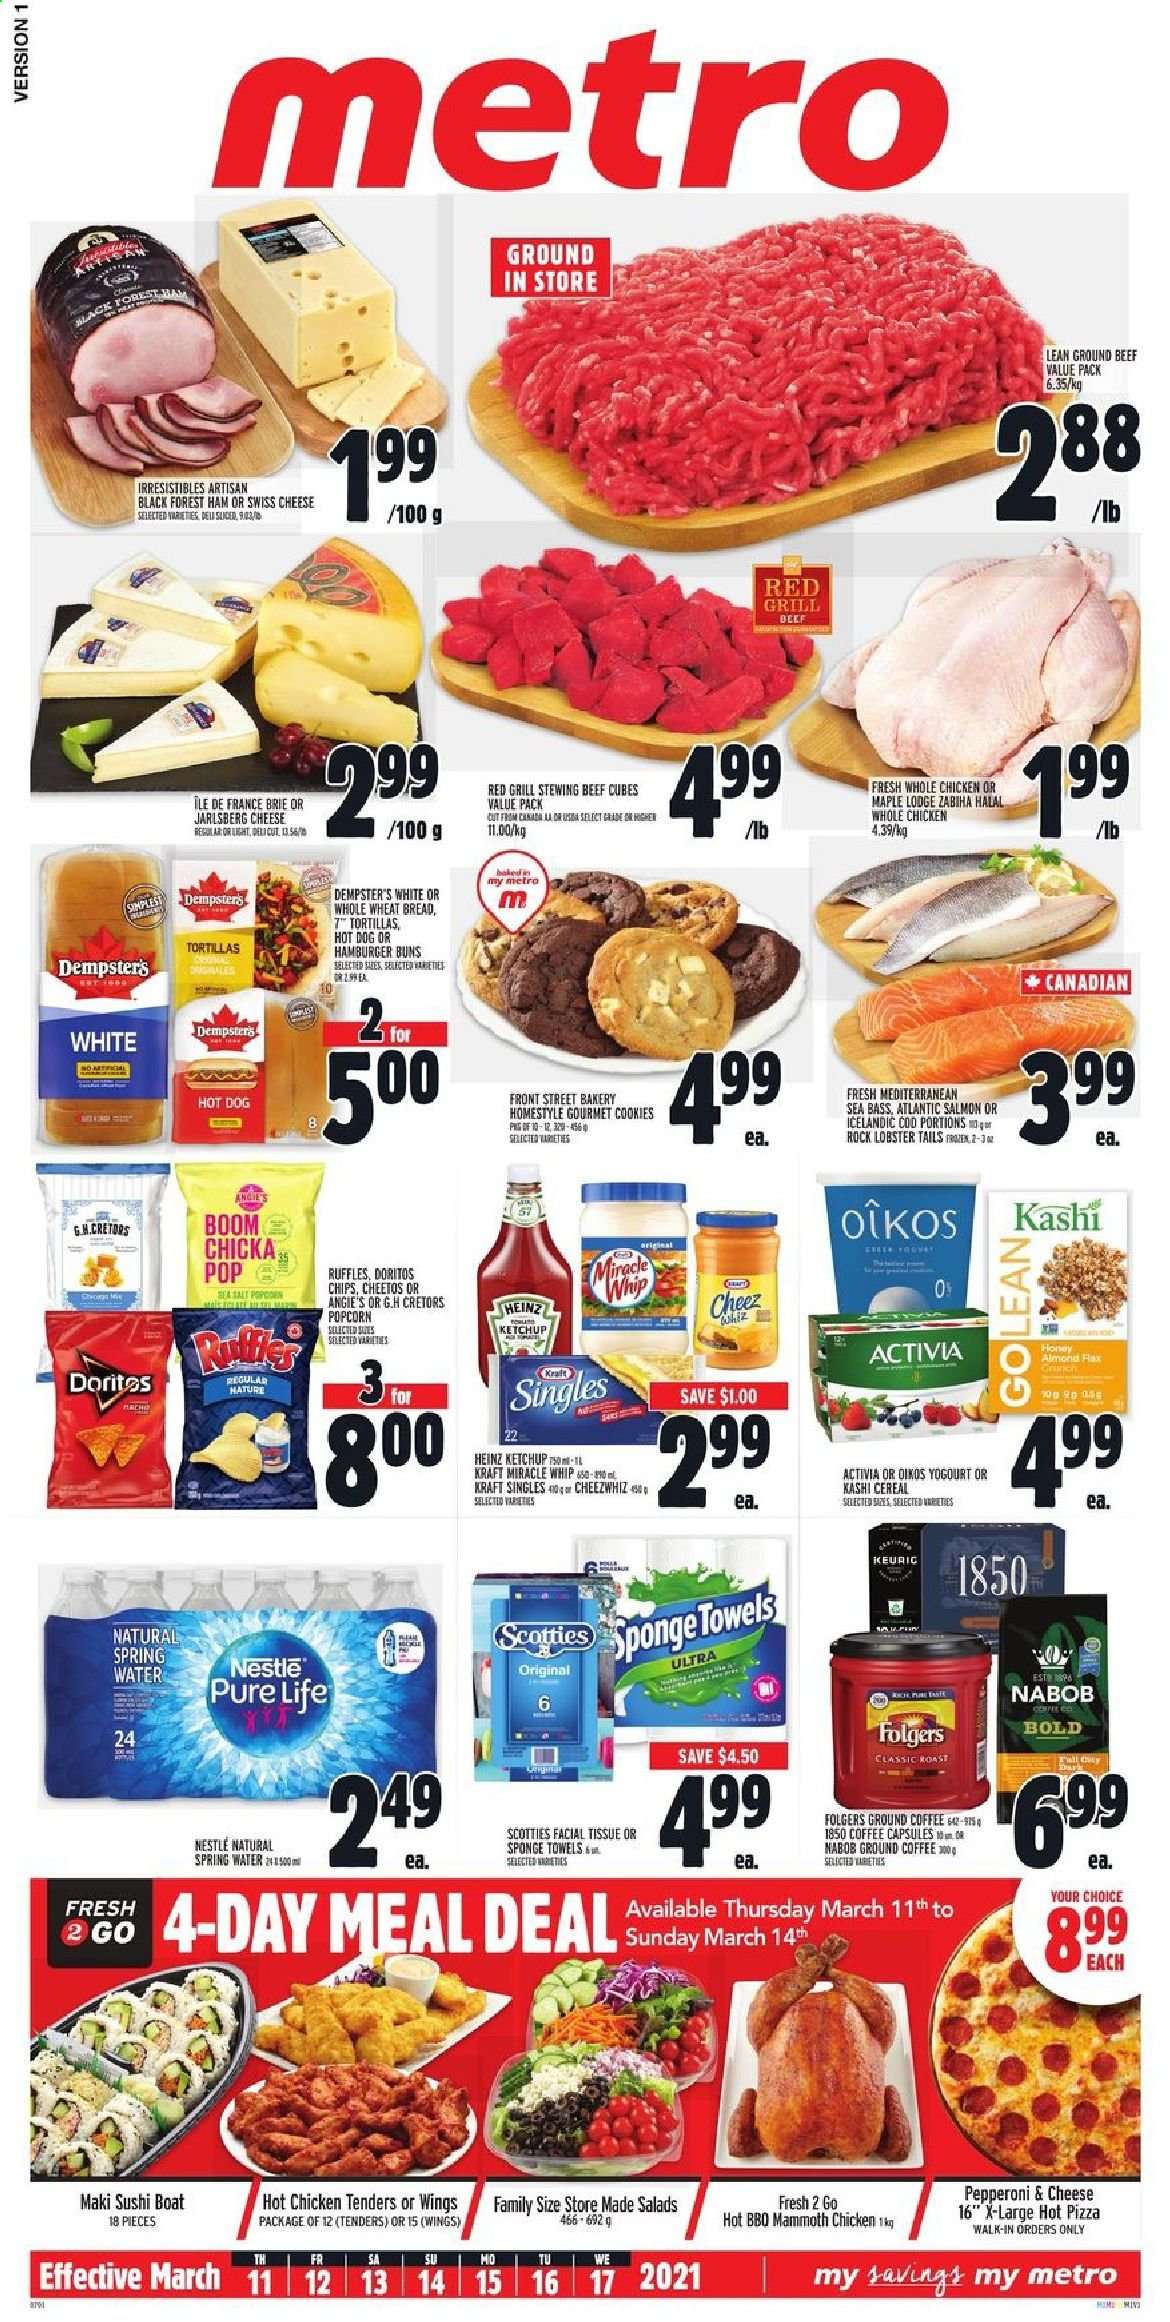 thumbnail - Metro Flyer - March 11, 2021 - March 17, 2021 - Sales products - tortillas, wheat bread, buns, burger buns, cod, lobster, salmon, sea bass, lobster tail, hot dog, pizza, chicken tenders, Kraft®, ham, sandwich slices, swiss cheese, brie, Kraft Singles, Activia, Oikos, Miracle Whip, cookies, Doritos, Cheetos, popcorn, Ruffles, Heinz, cereals, spring water, coffee, Folgers, ground coffee, coffee capsules, Keurig, whole chicken, chicken, beef meat, ground beef, stewing beef, tissues, sponge, slicer, towel, Nestlé, chips. Page 1.